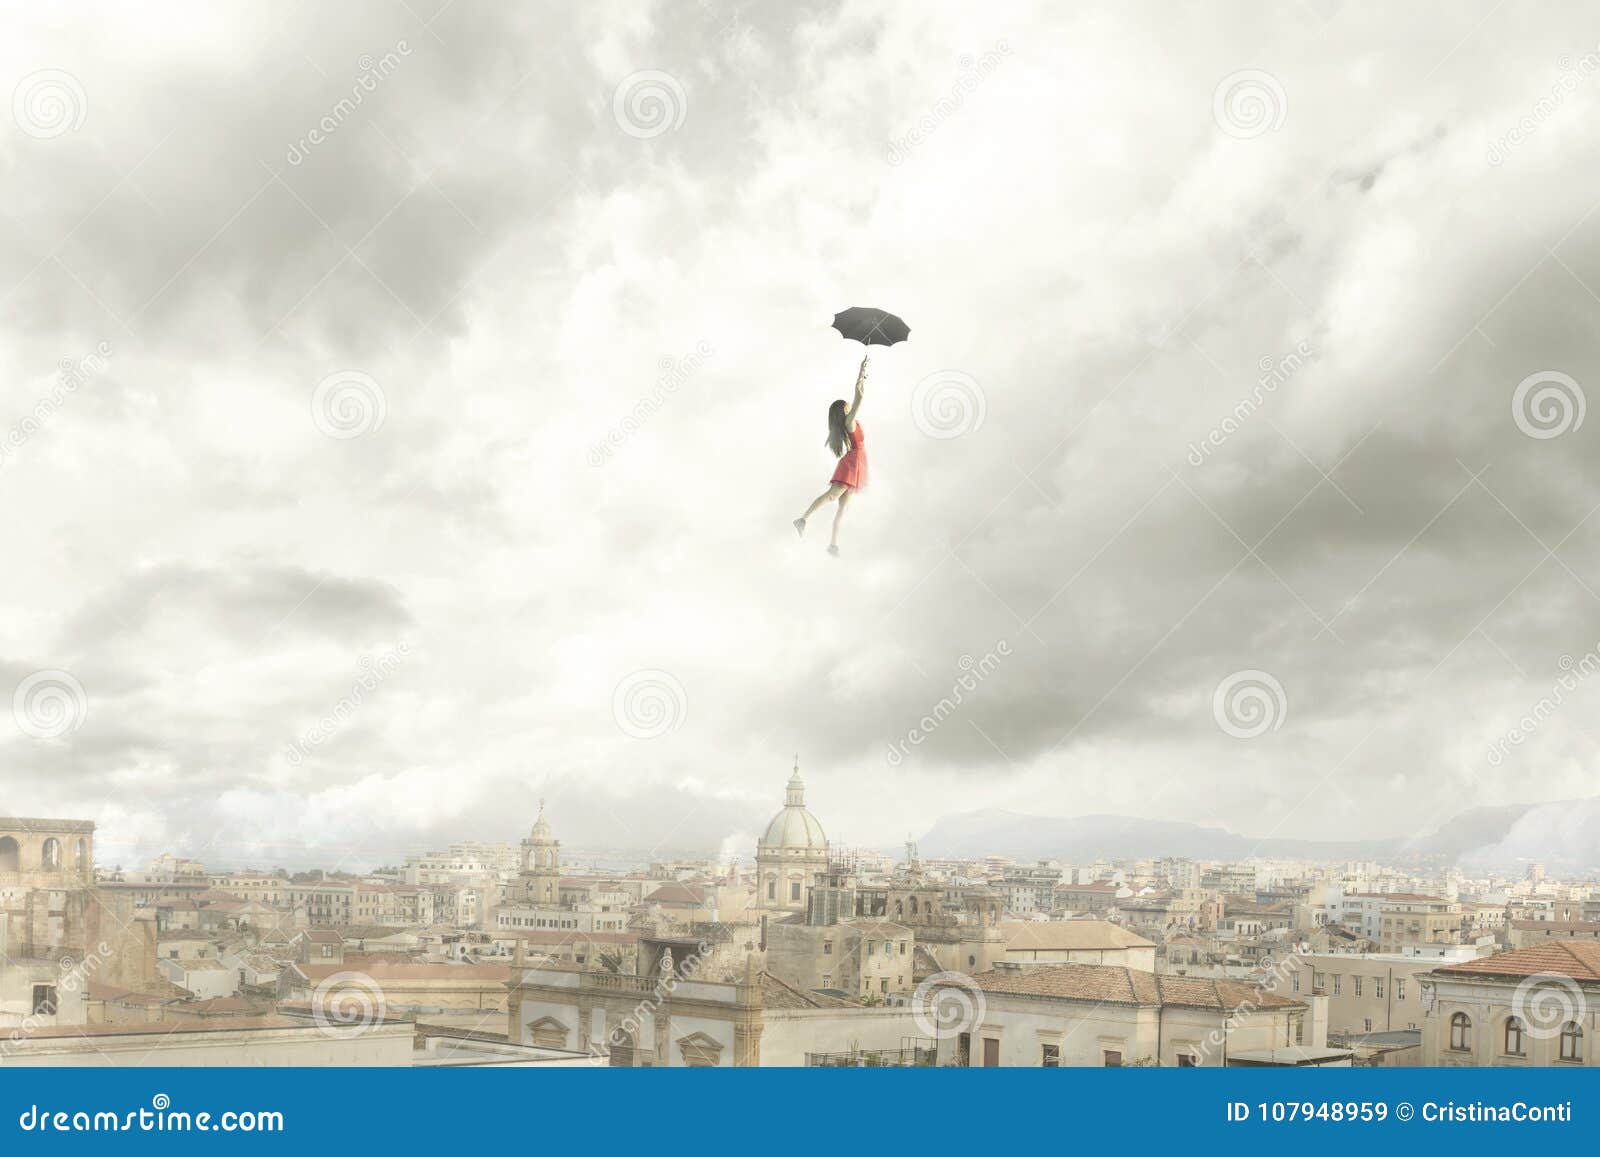 surreal moment of a woman flying with her umbrella over the city